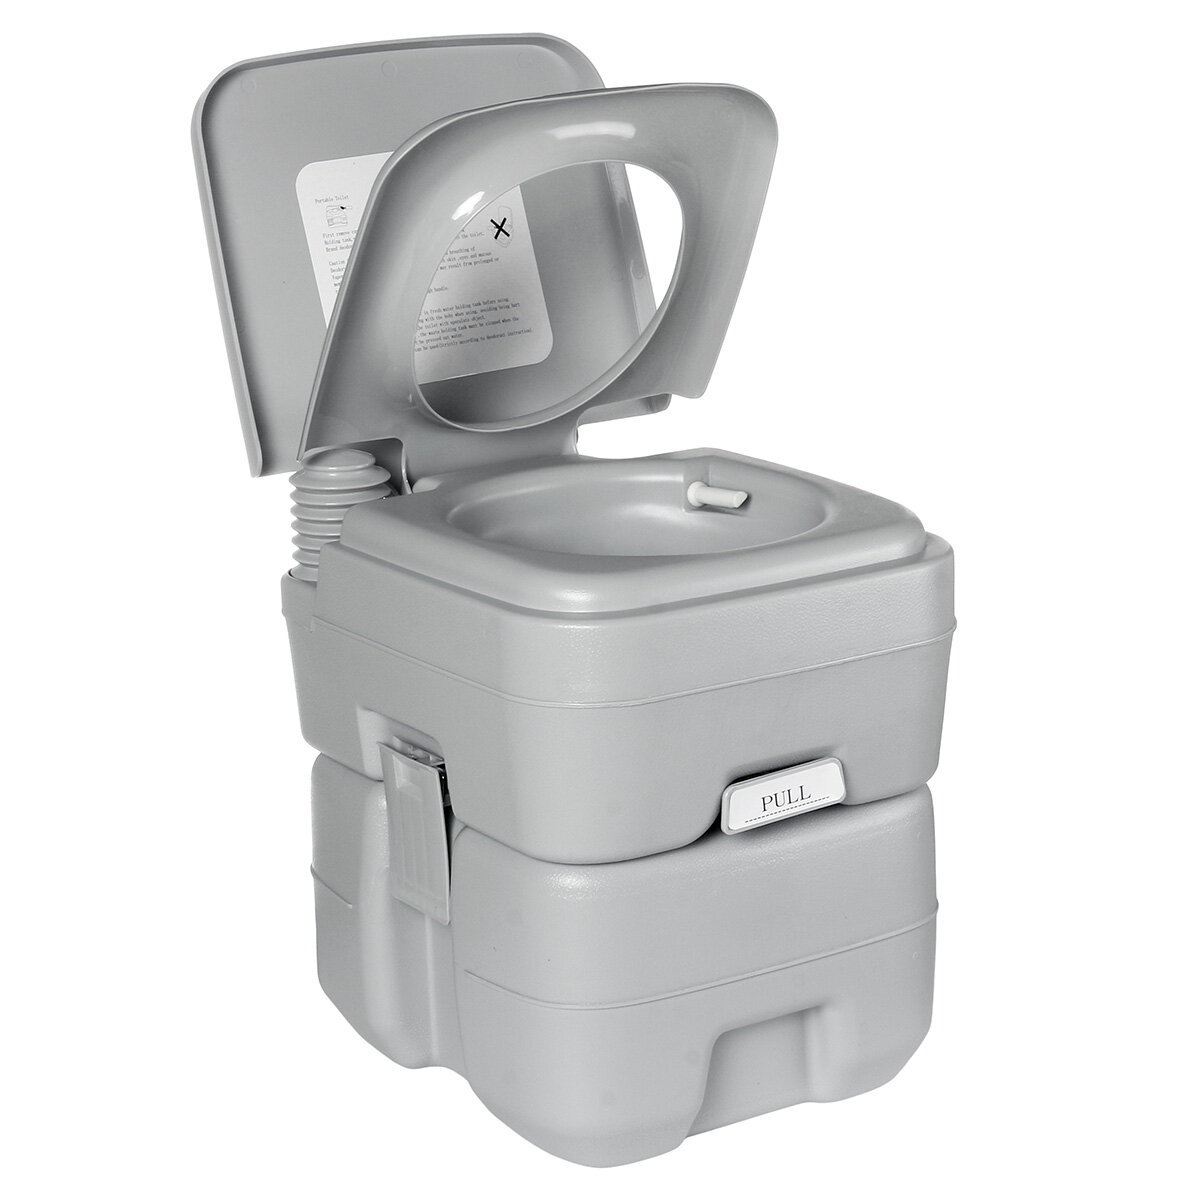 Image of 20L Portable Toilet Flush Potty Bucket Seats Mobile Toilet Indoor Outdoor Camping Travel